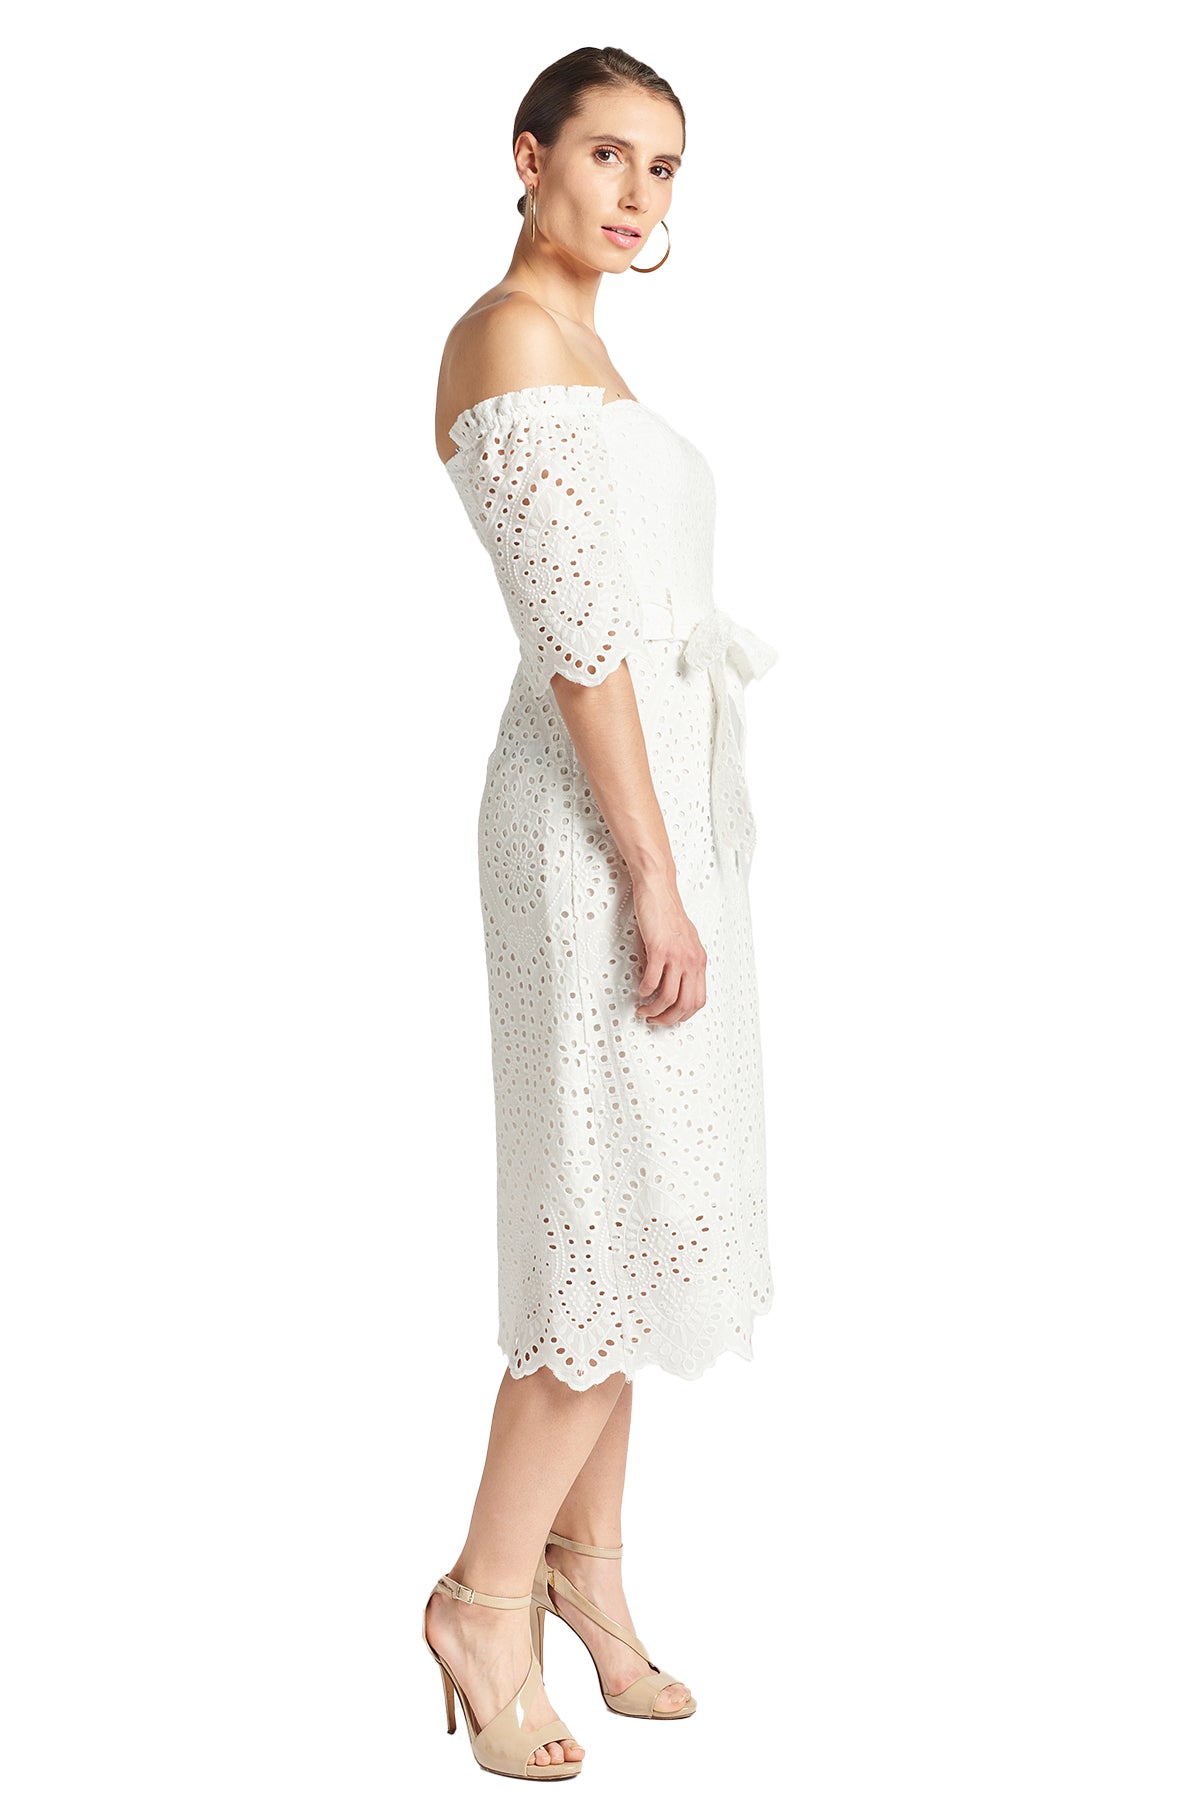 Side view of model wearing the Simona Maghen Jasmine Dress, white cotton scalloped eyelet midi a-line dress with off the shoulder sweetheart neckline, self belt, and short sleeves.